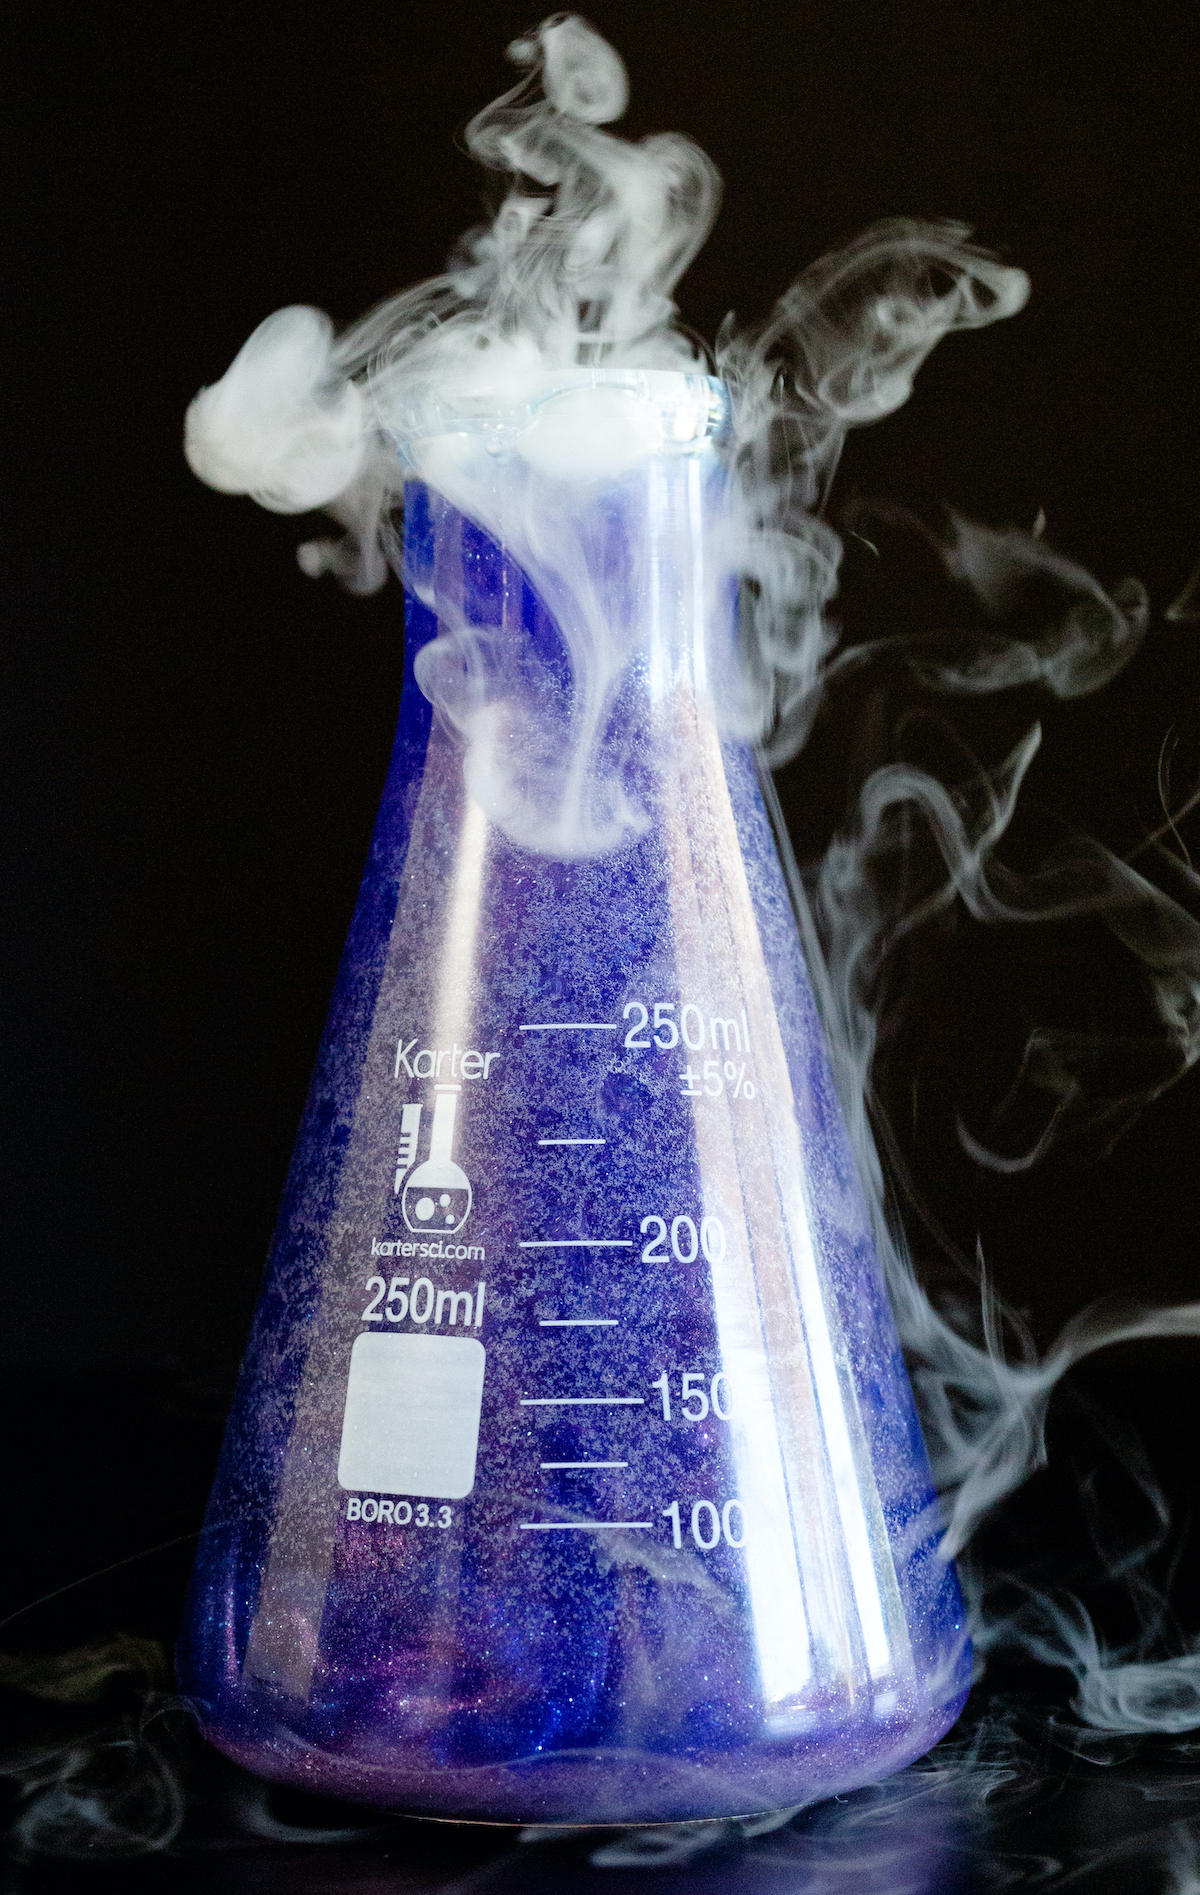 A scientific flask that's filled with a sparkling purple liquid sits on a black background. Smoke is rising out of the top.